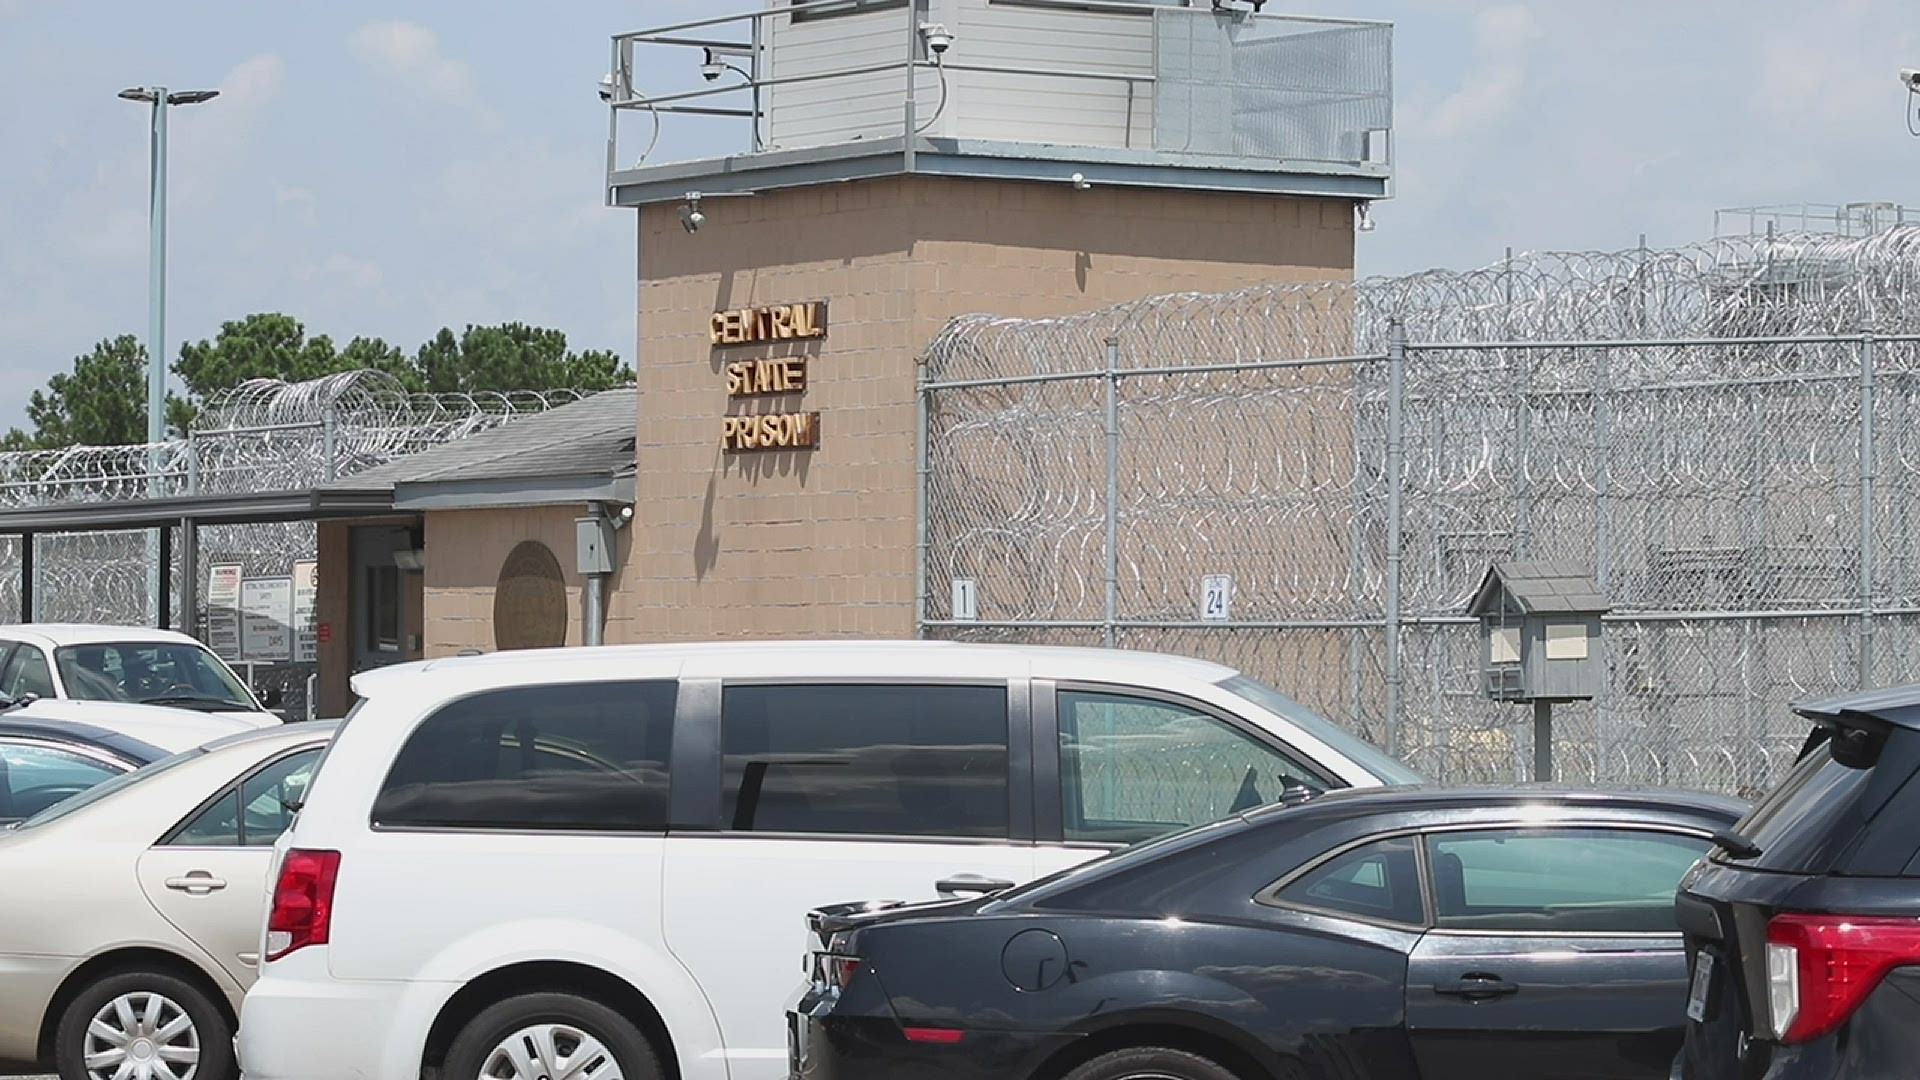 Authorities are investigating after a man was killed at a Macon prison Wednesday.